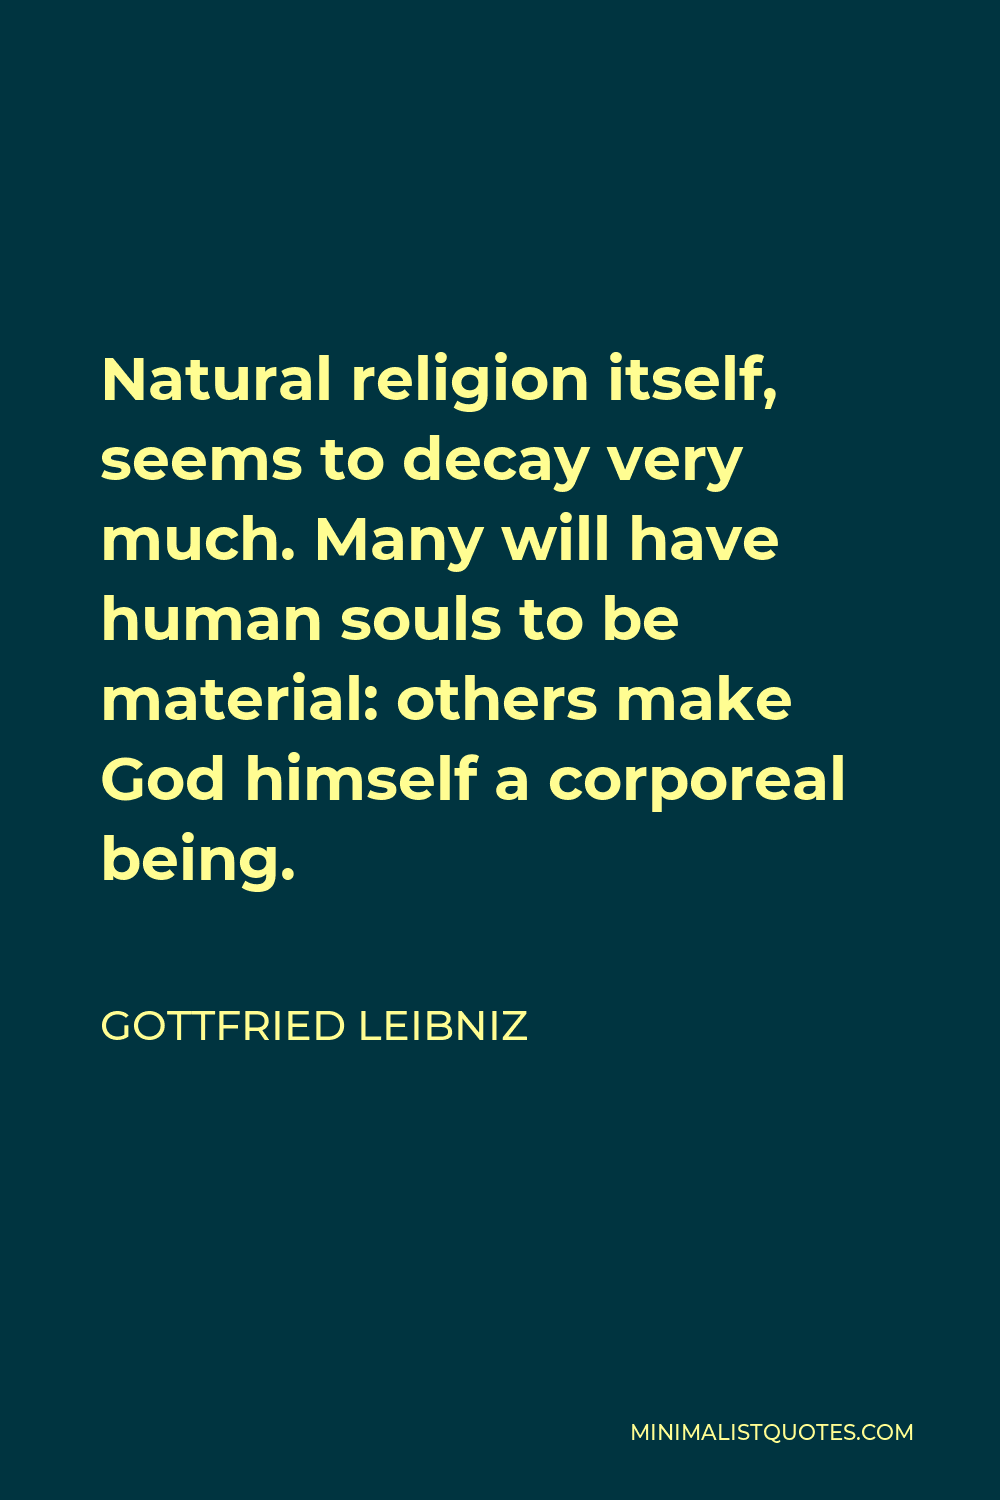 Gottfried Wilhelm Leibniz Quote - Natural religion itself, seems to decay very much. Many will have human souls to be material: others make God himself a corporeal being.